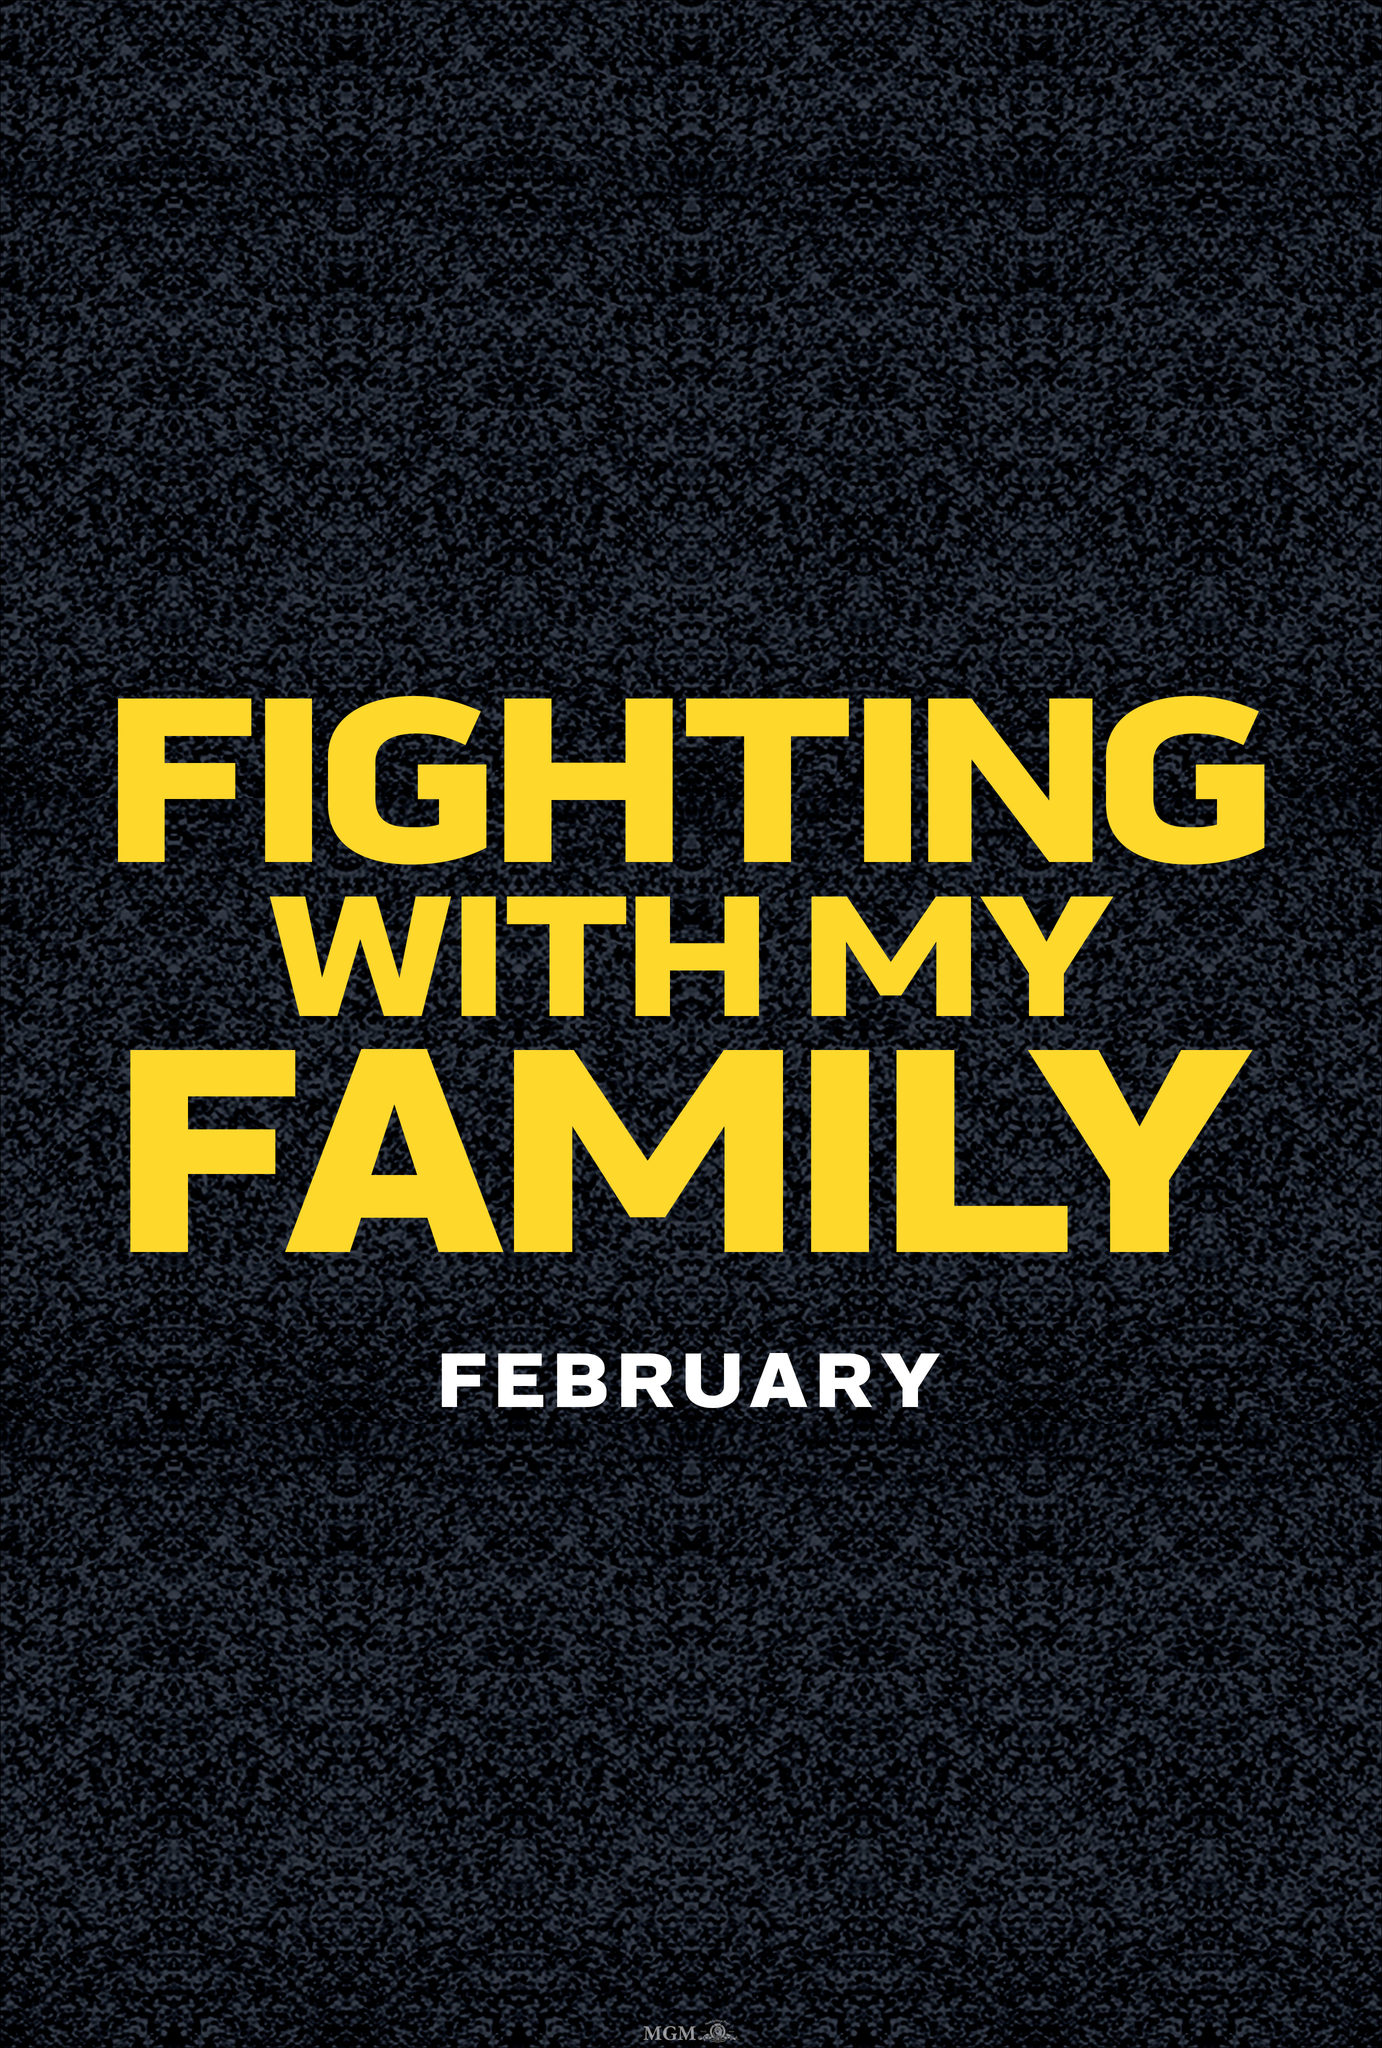 Fighting With My Family 2019 Movie Wallpapers